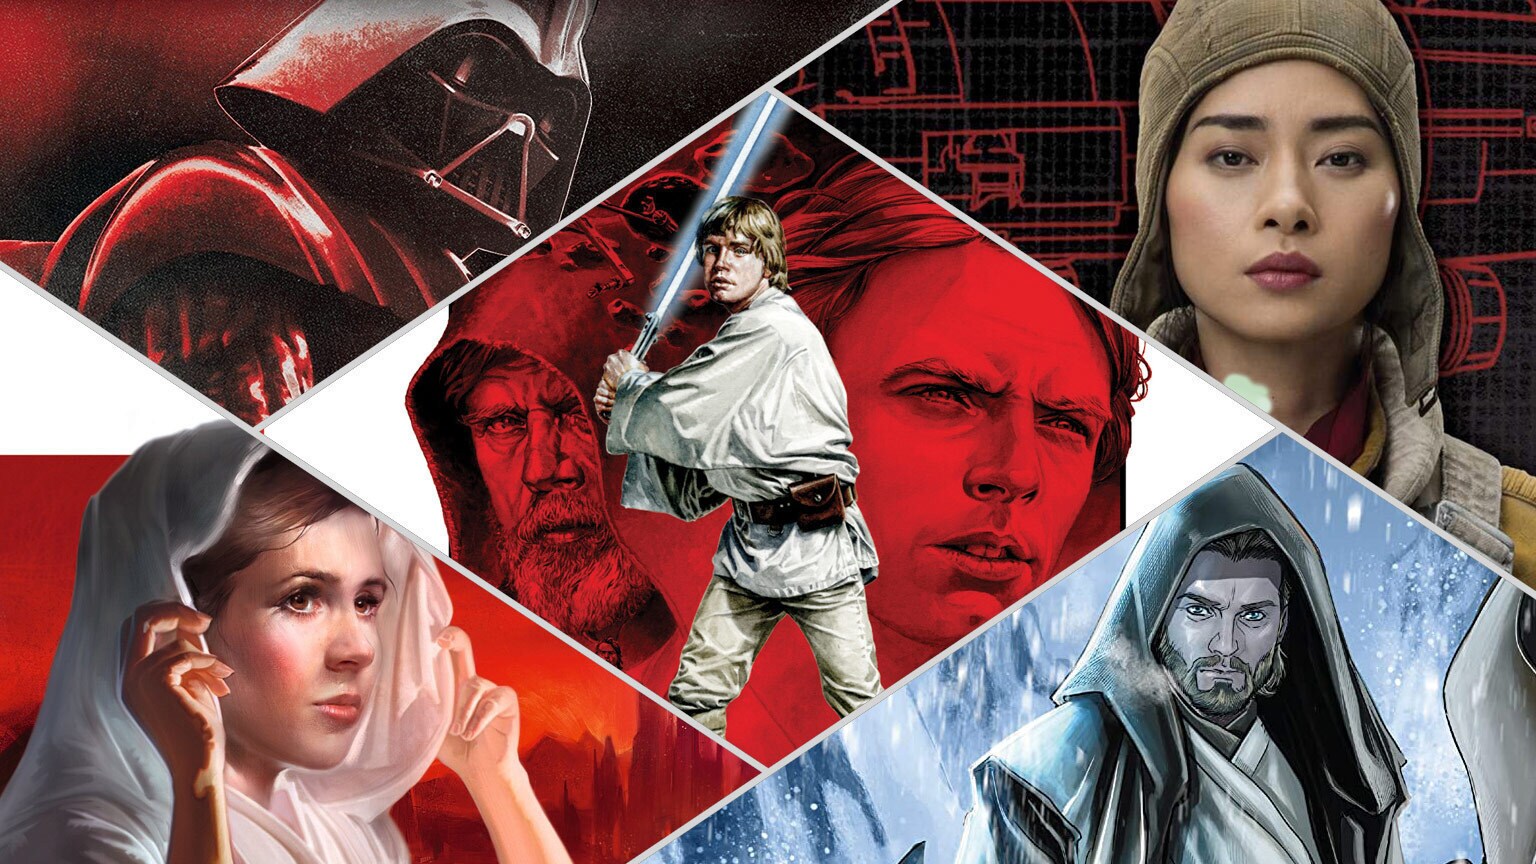 Looking for a Star Wars Summer Reading List? Found One, You Have!